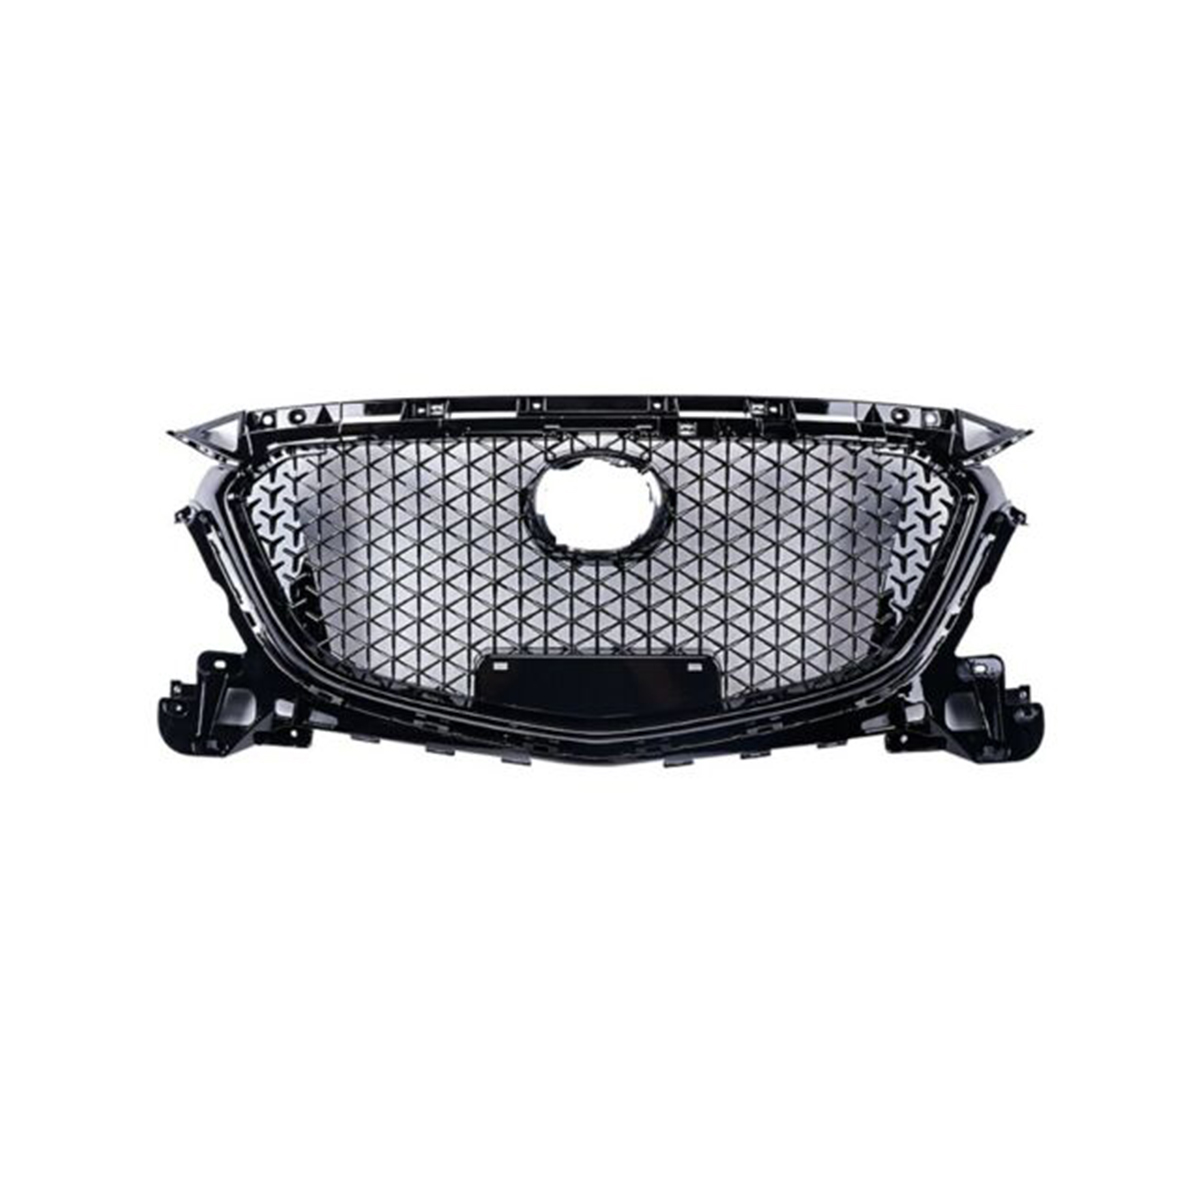 

Front Bumper Grille Upper Grill Cover Protector ABS Plastic Car Styling For Mazda 3 Axela 2017 2018